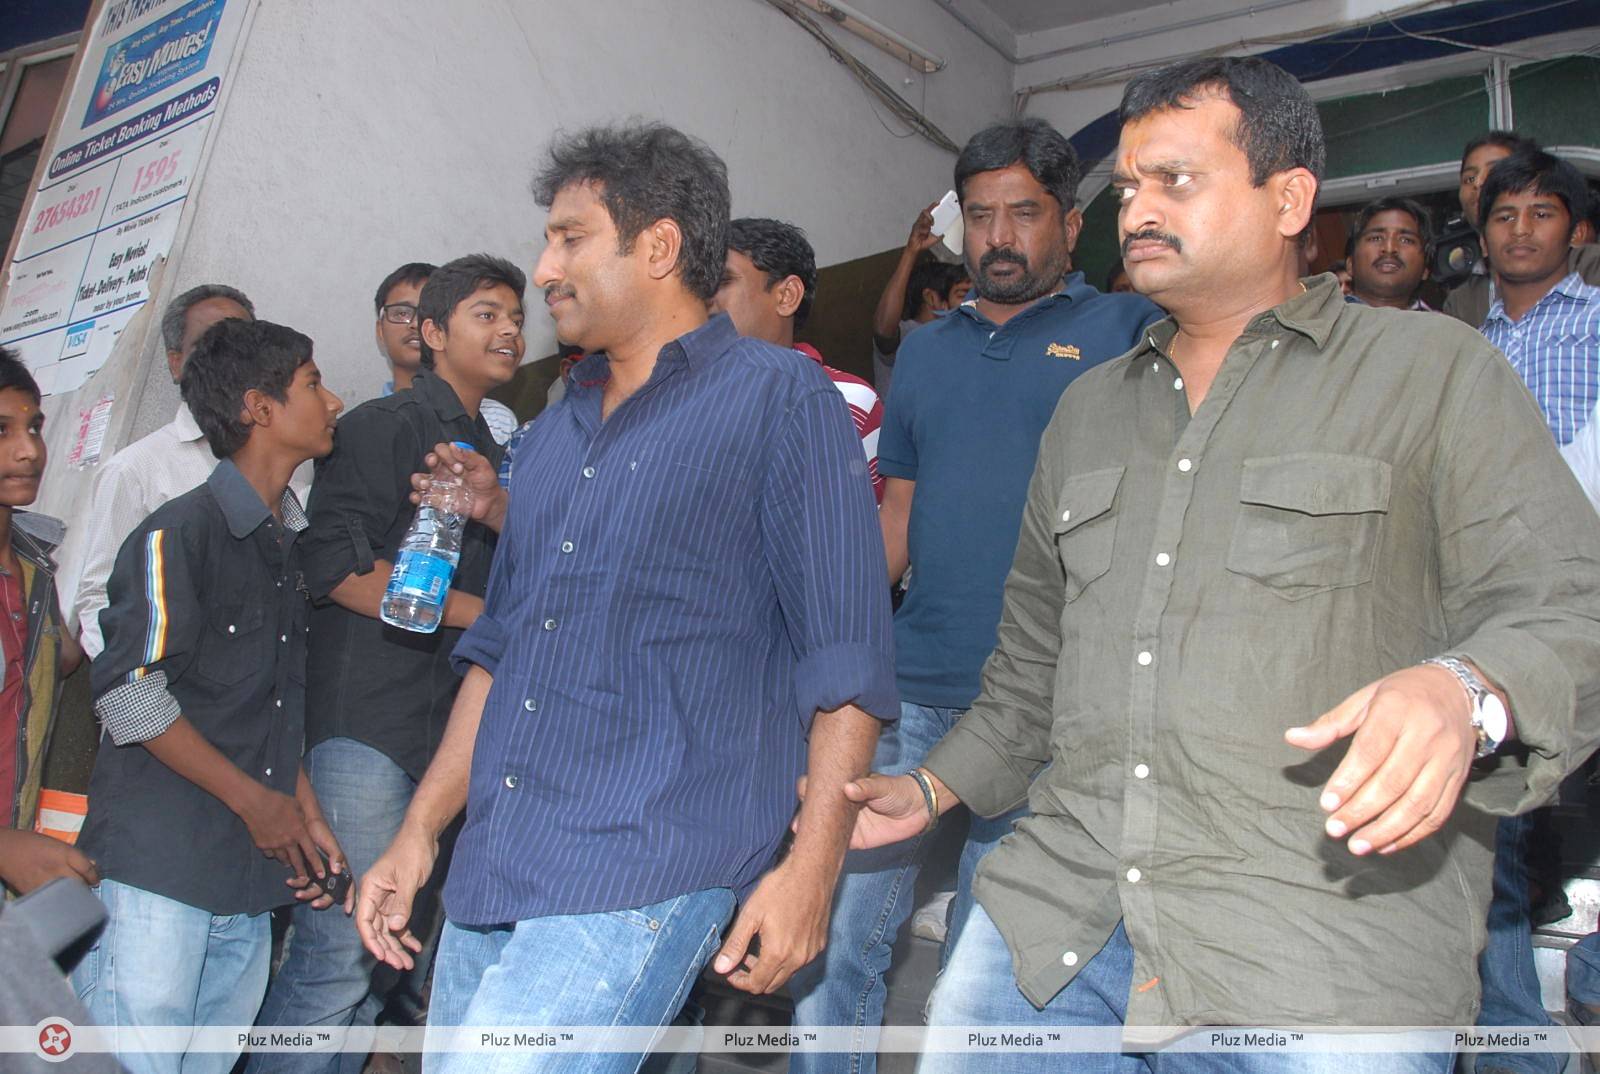 Baadshah Hungama at RTC X Roads Photos | Picture 425484